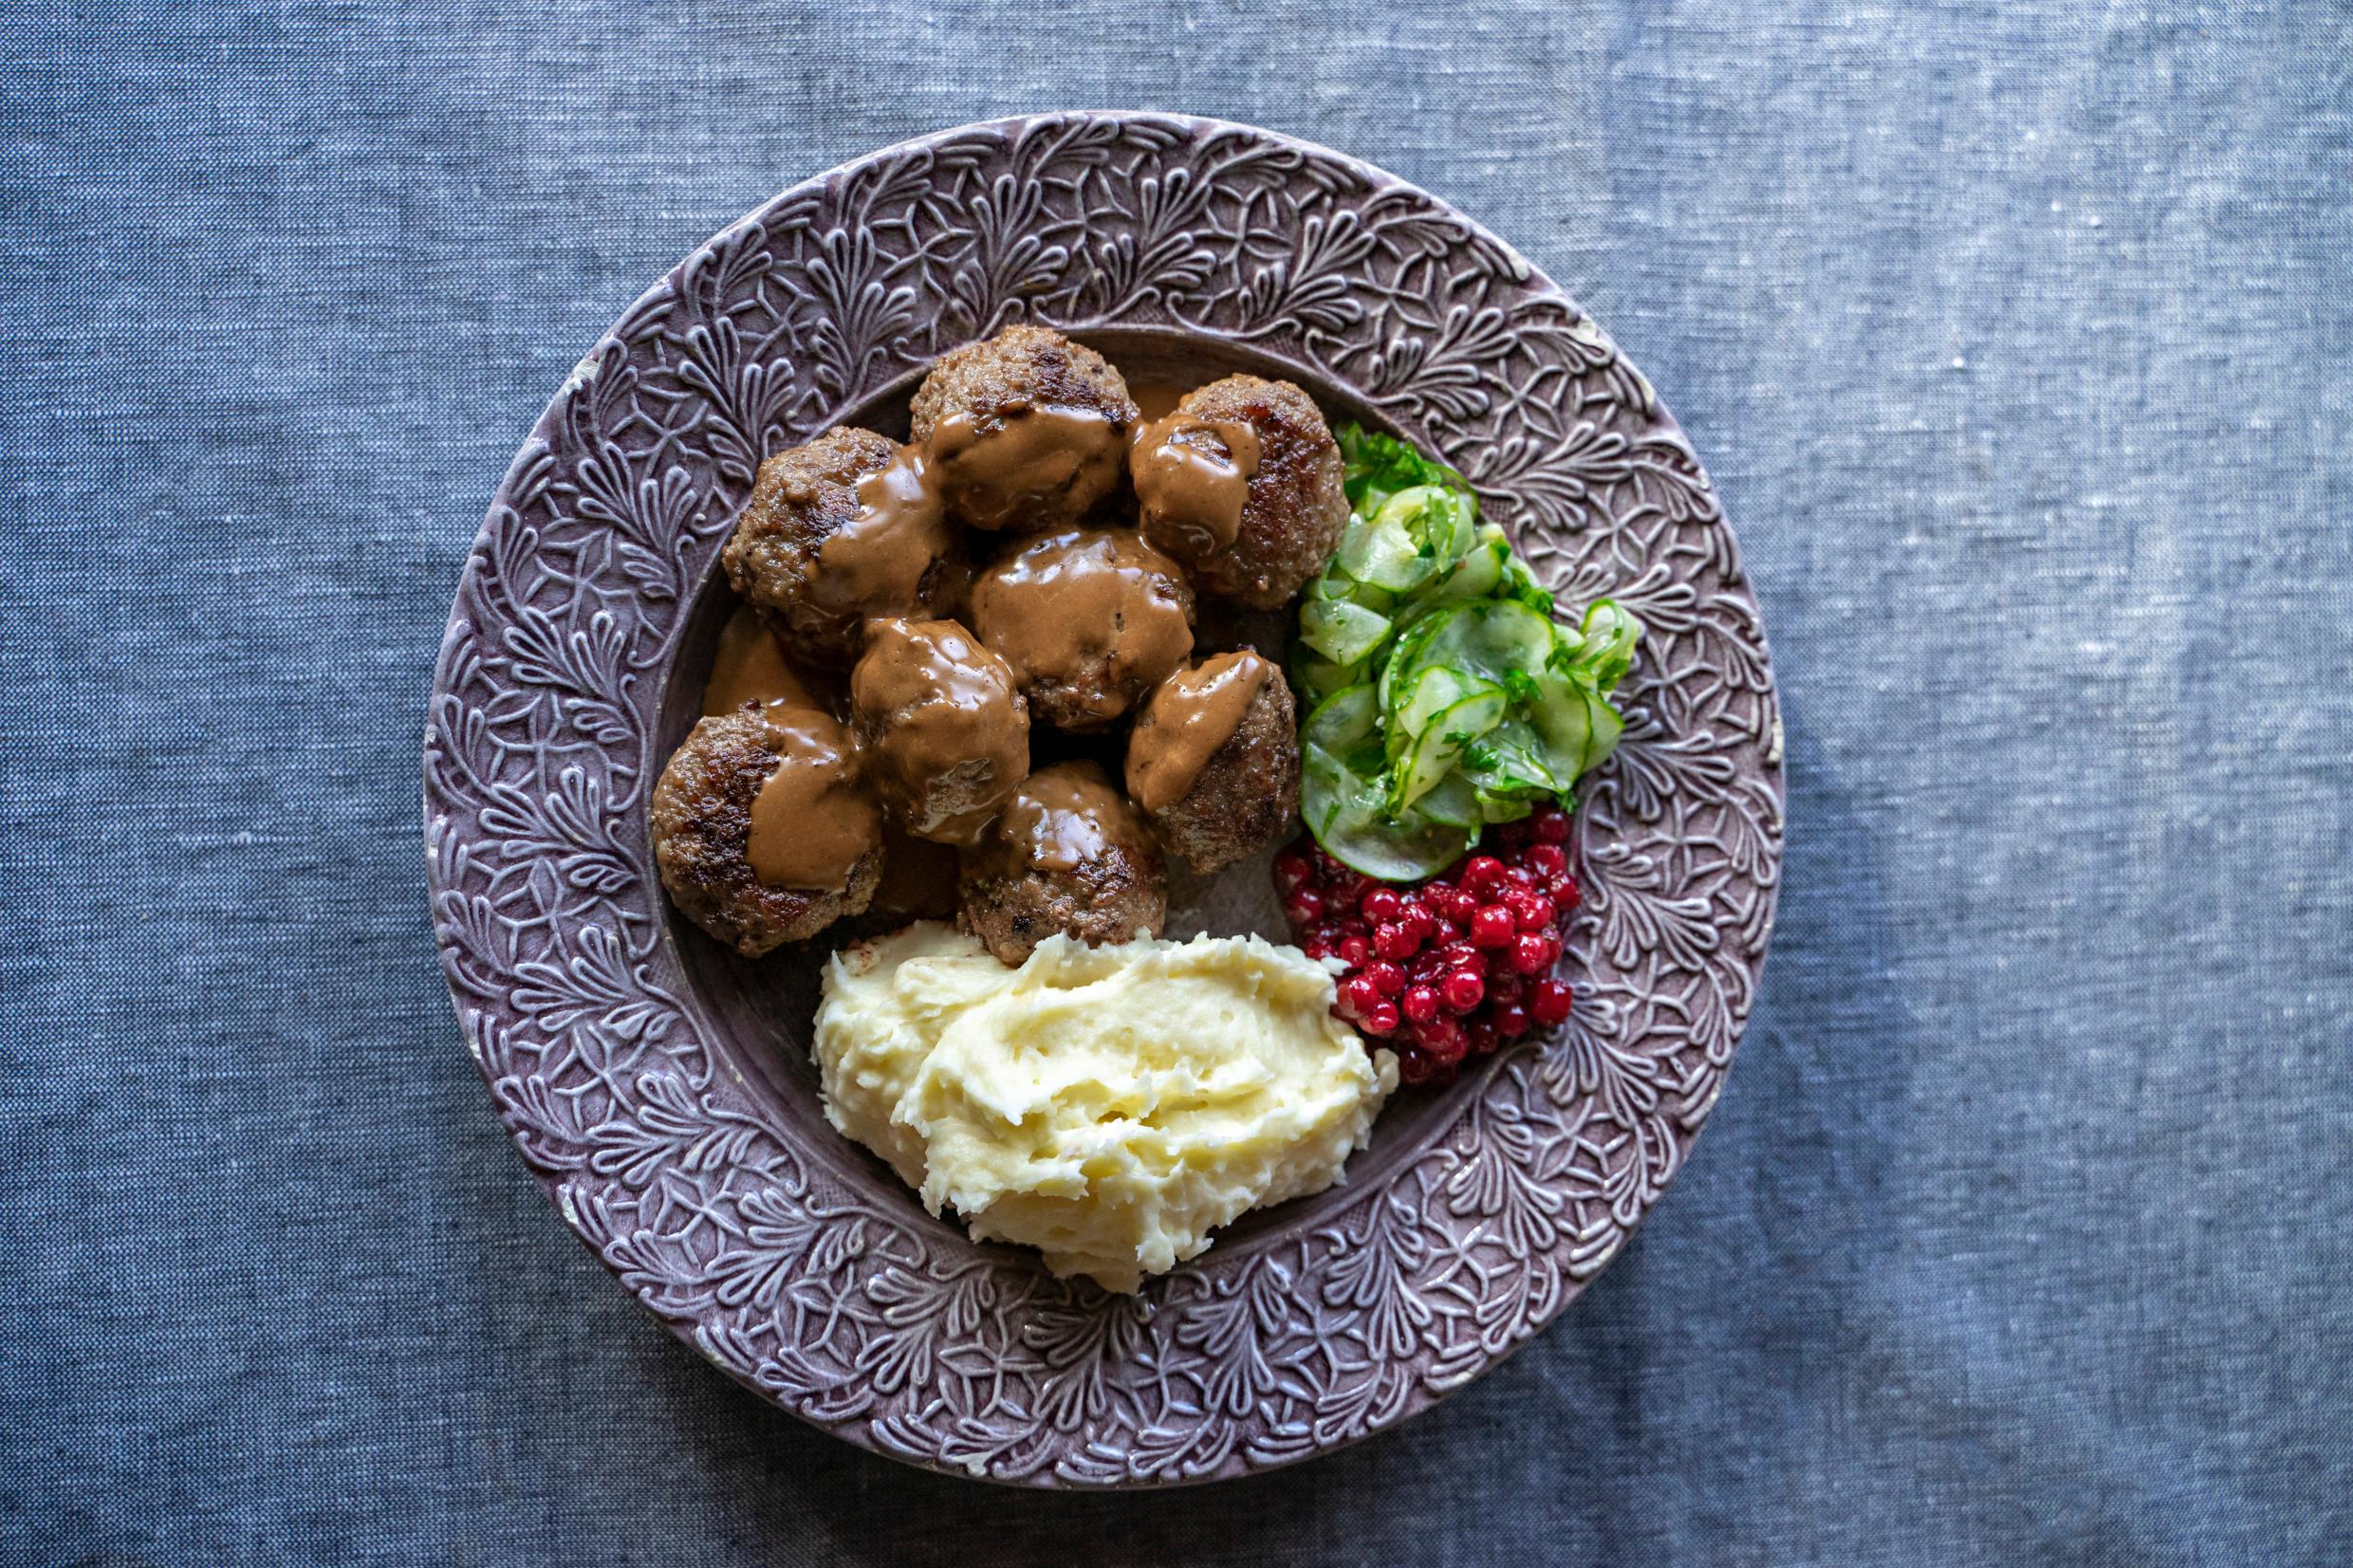 A plate with meatballs and condiments.